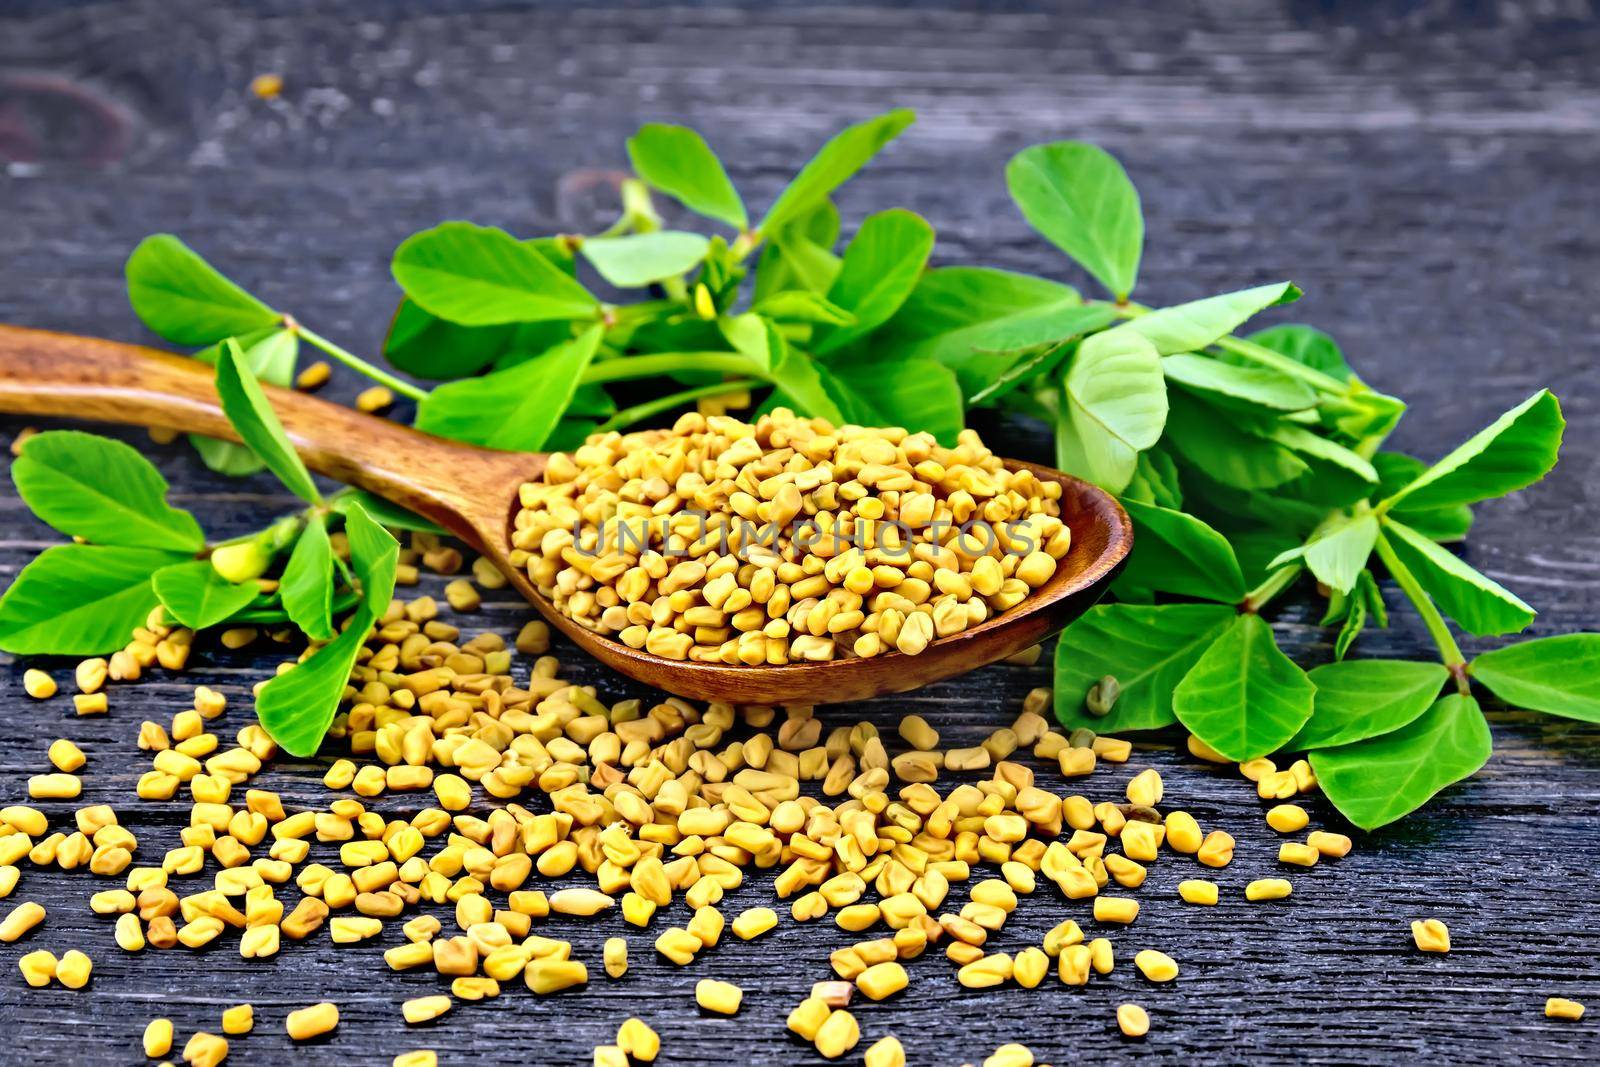 Fenugreek seeds in a spoon and on a table with green leaves against a black wooden board